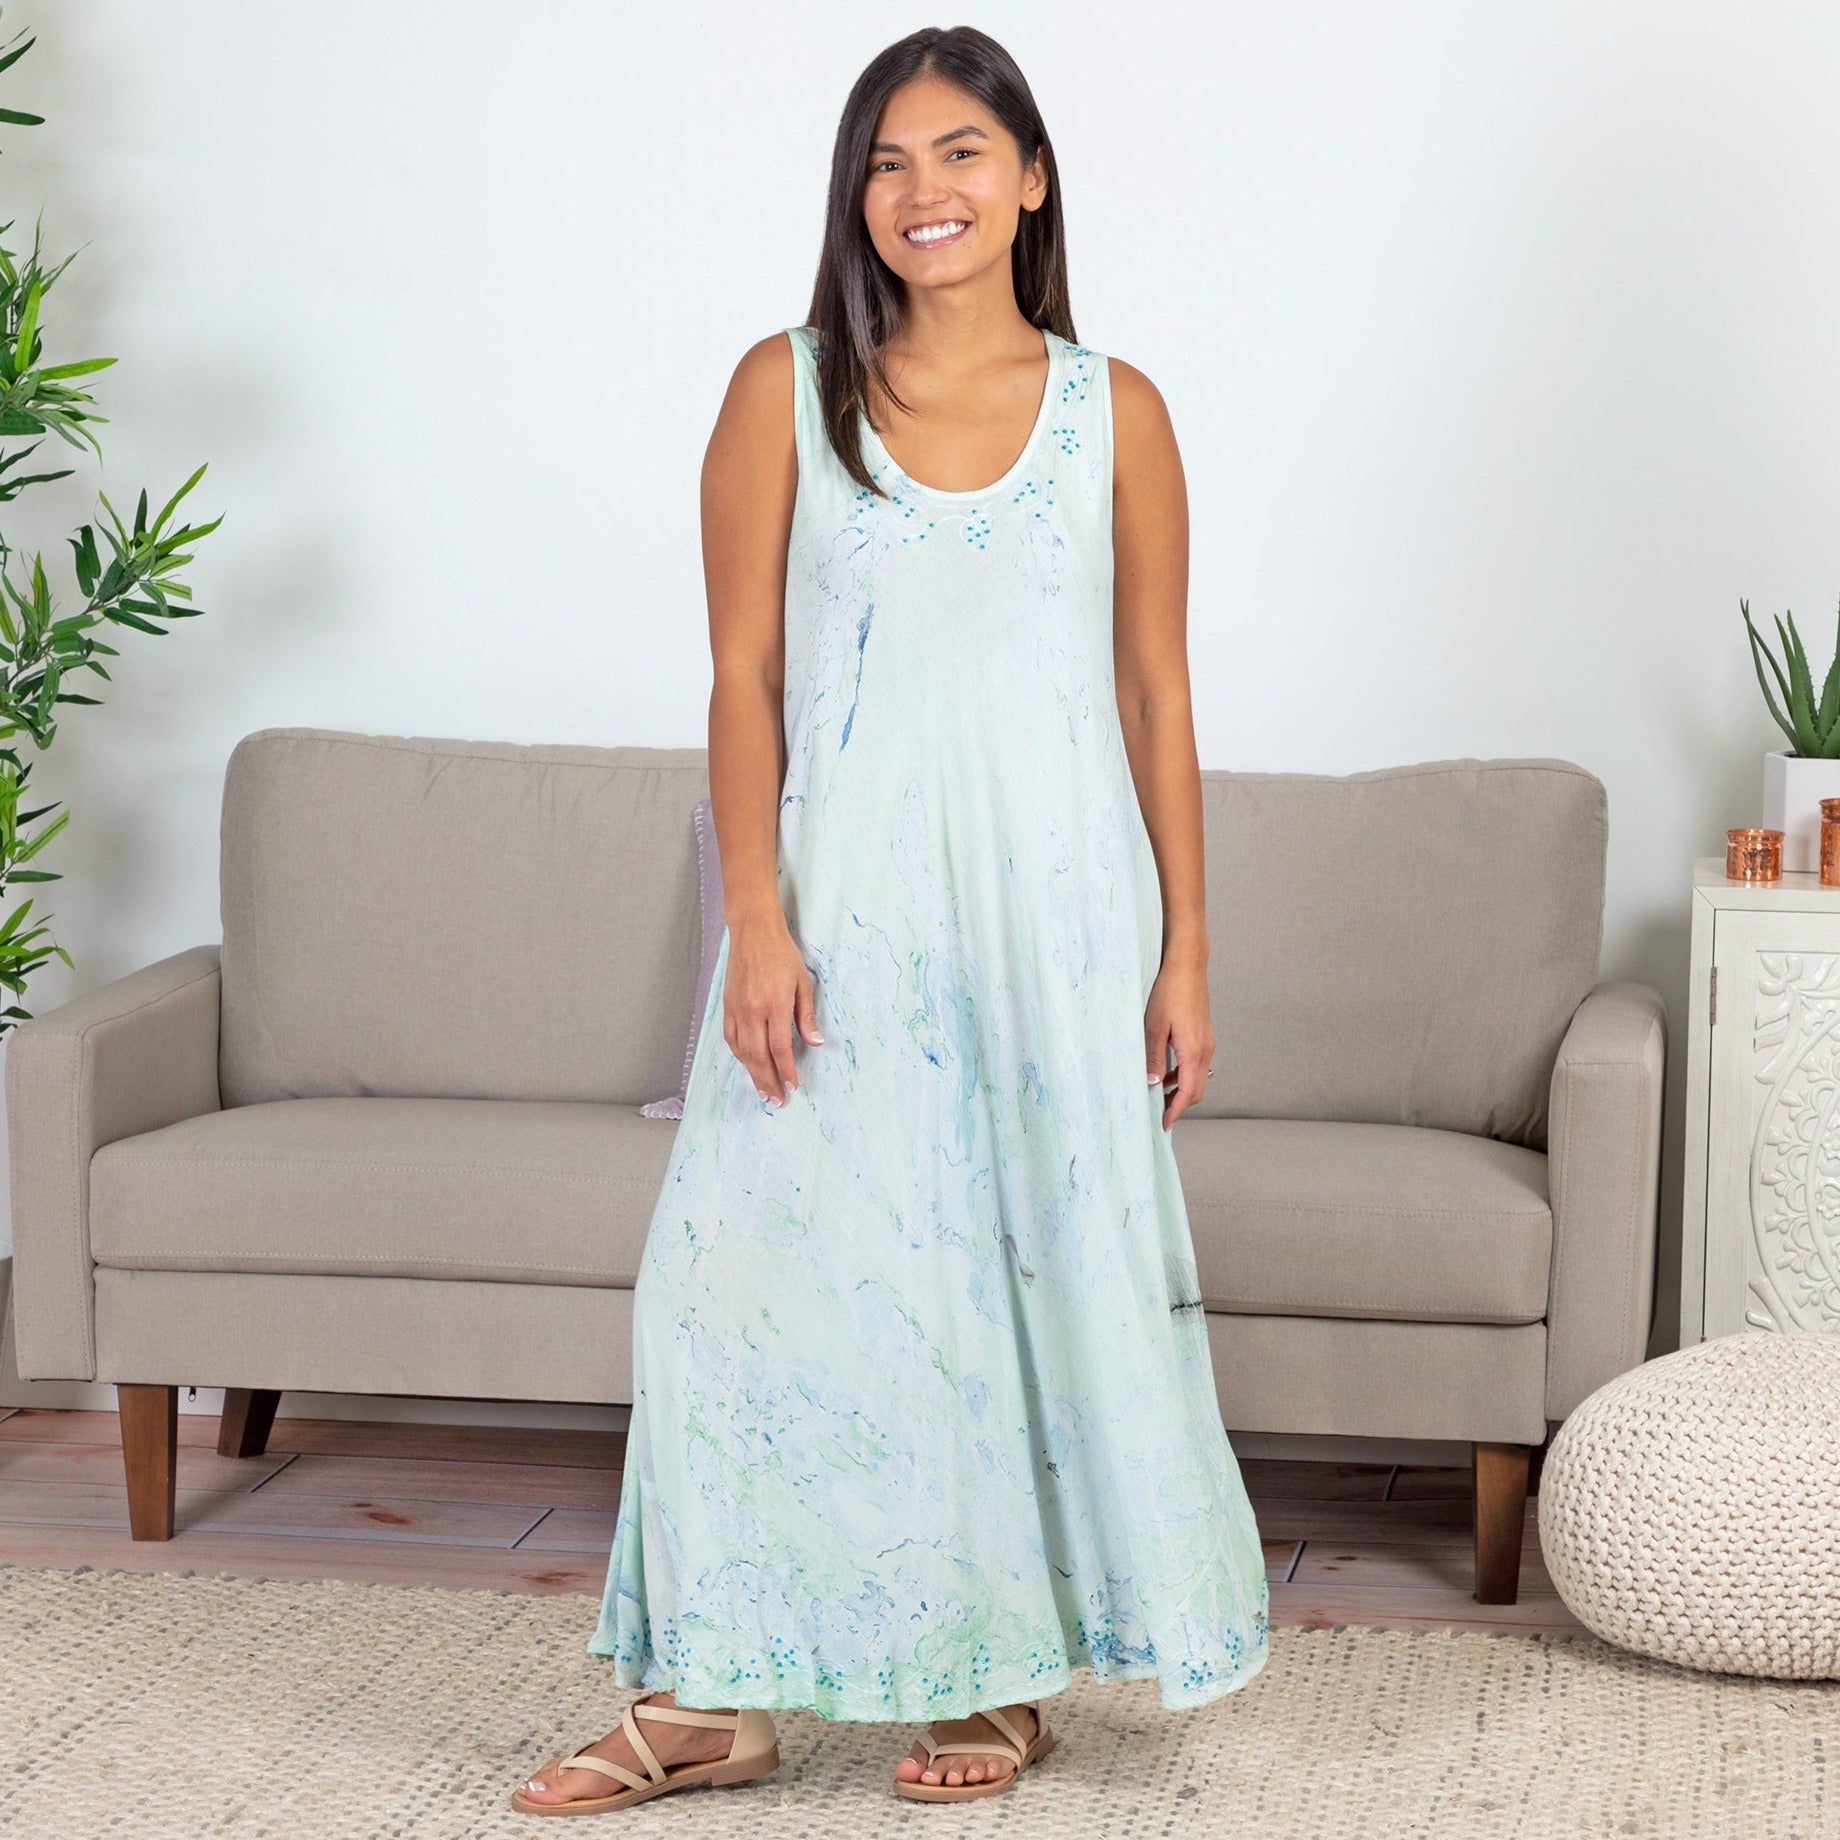 Marble Tie-Dye Long Dress - Green - One Size Fits Most